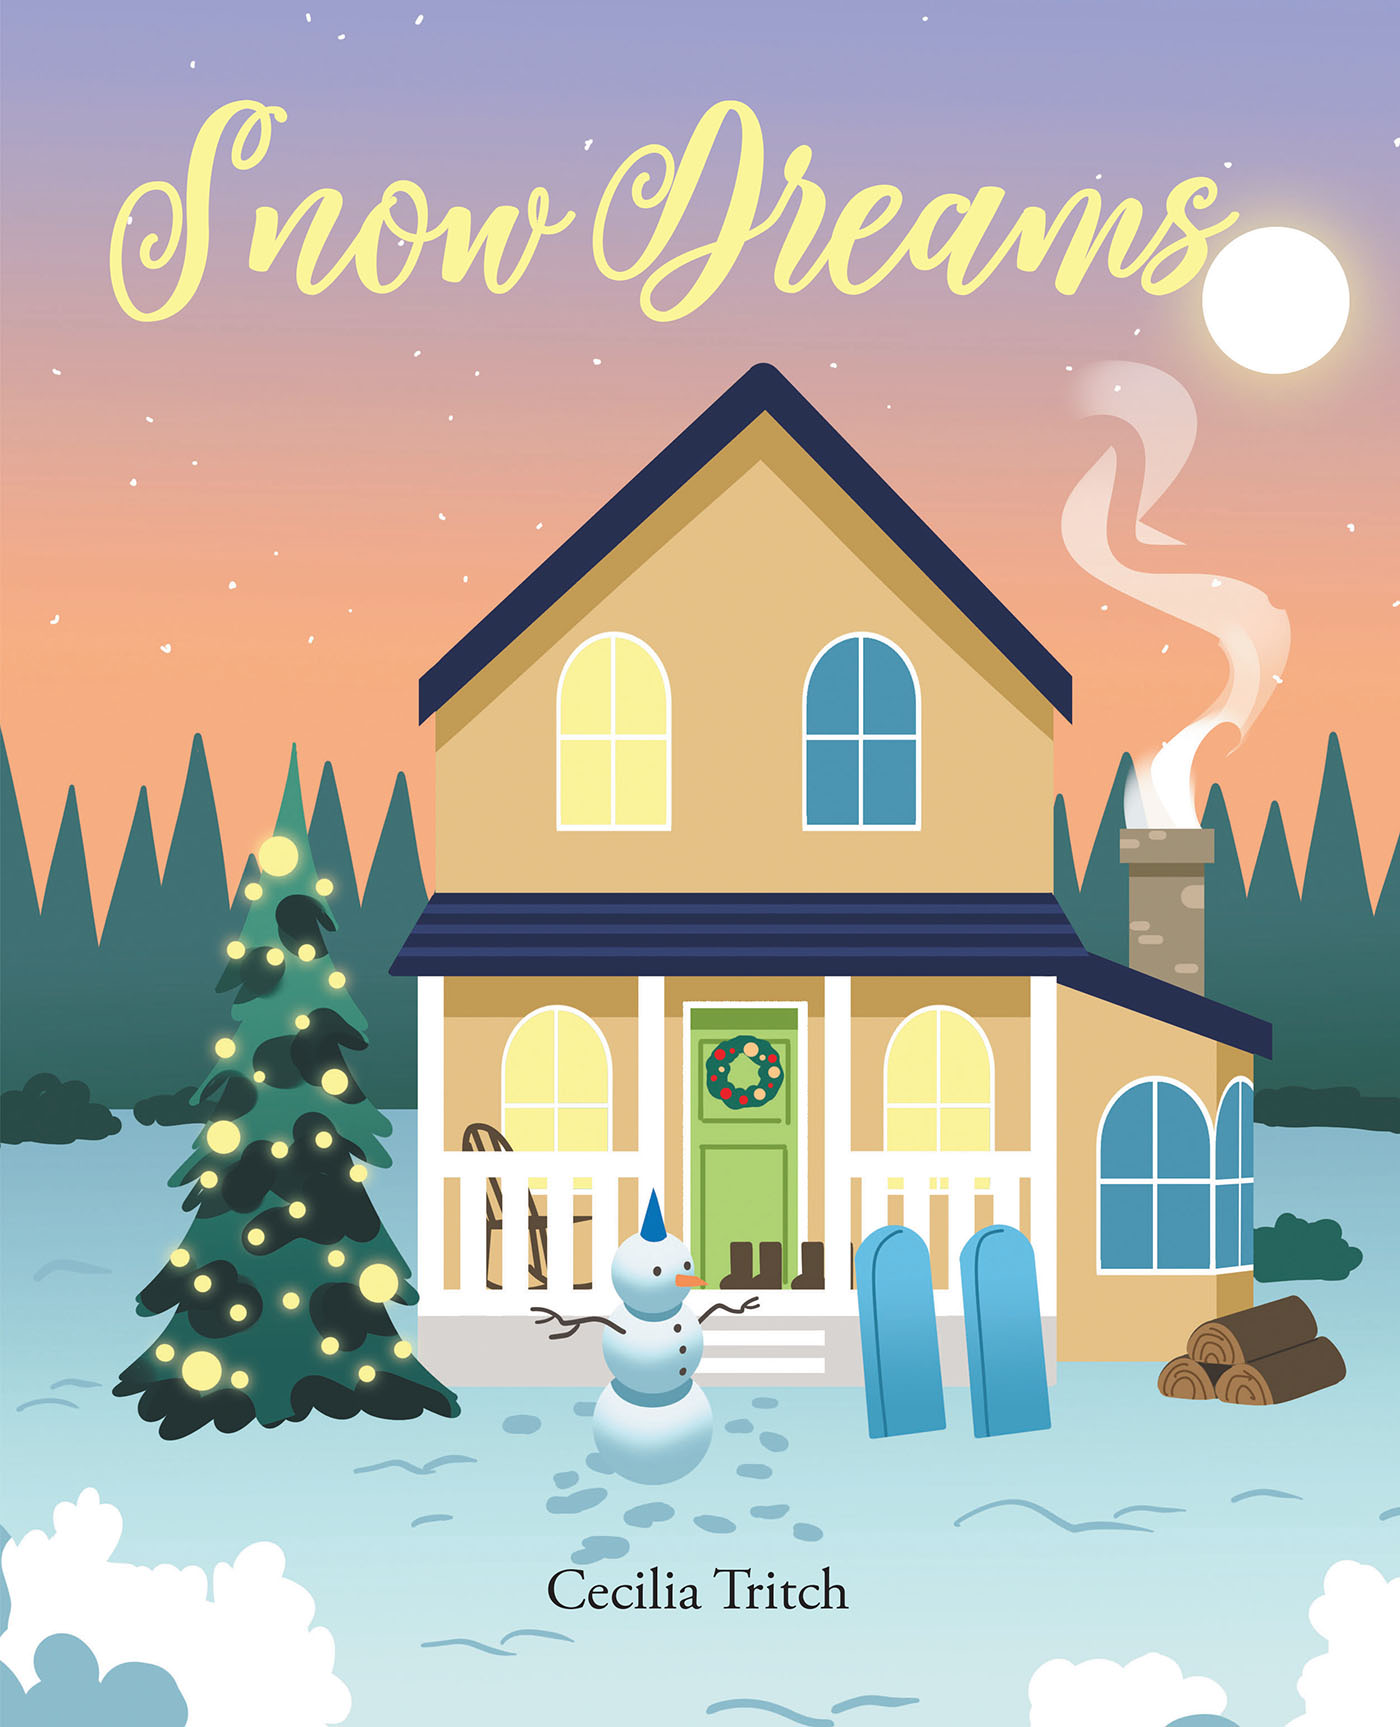 Cecilia Tritch’s Newly Released "Snow Dreams" is a Lighthearted Celebration of the Joys of a Simple Snow Day